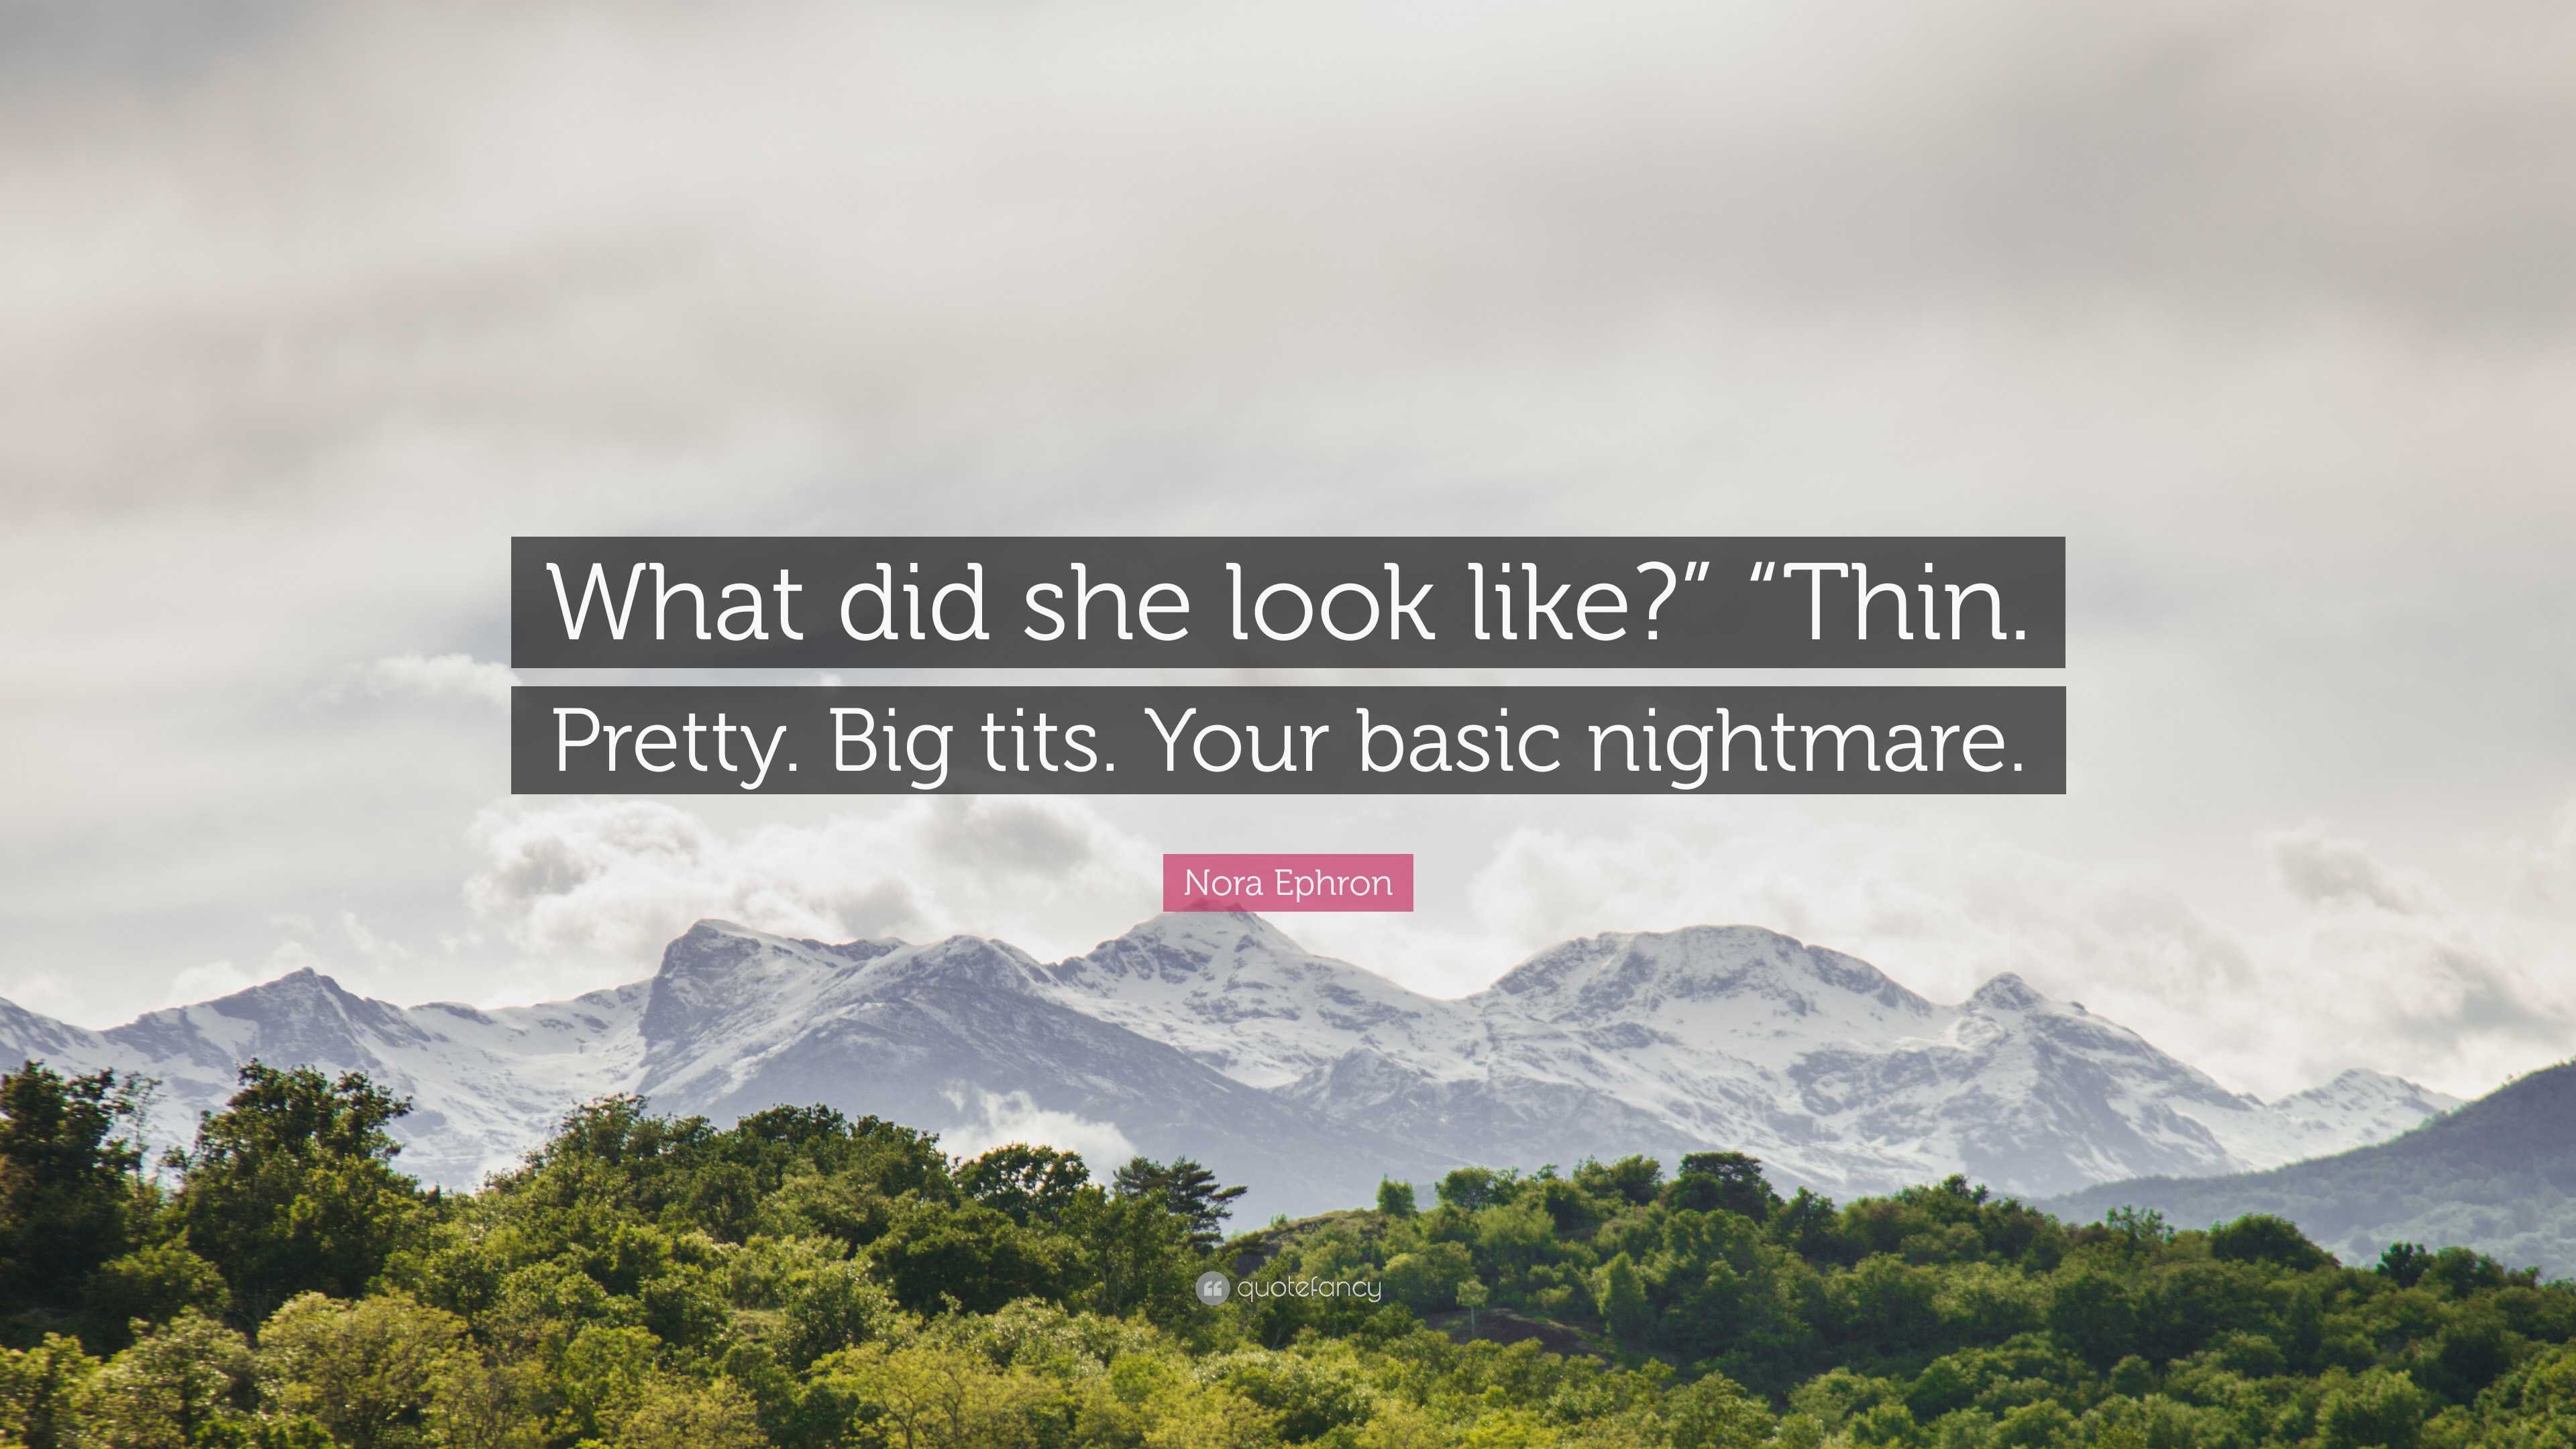 Nora Ephron Quote: “What did she look like?” “Thin. Pretty. Big